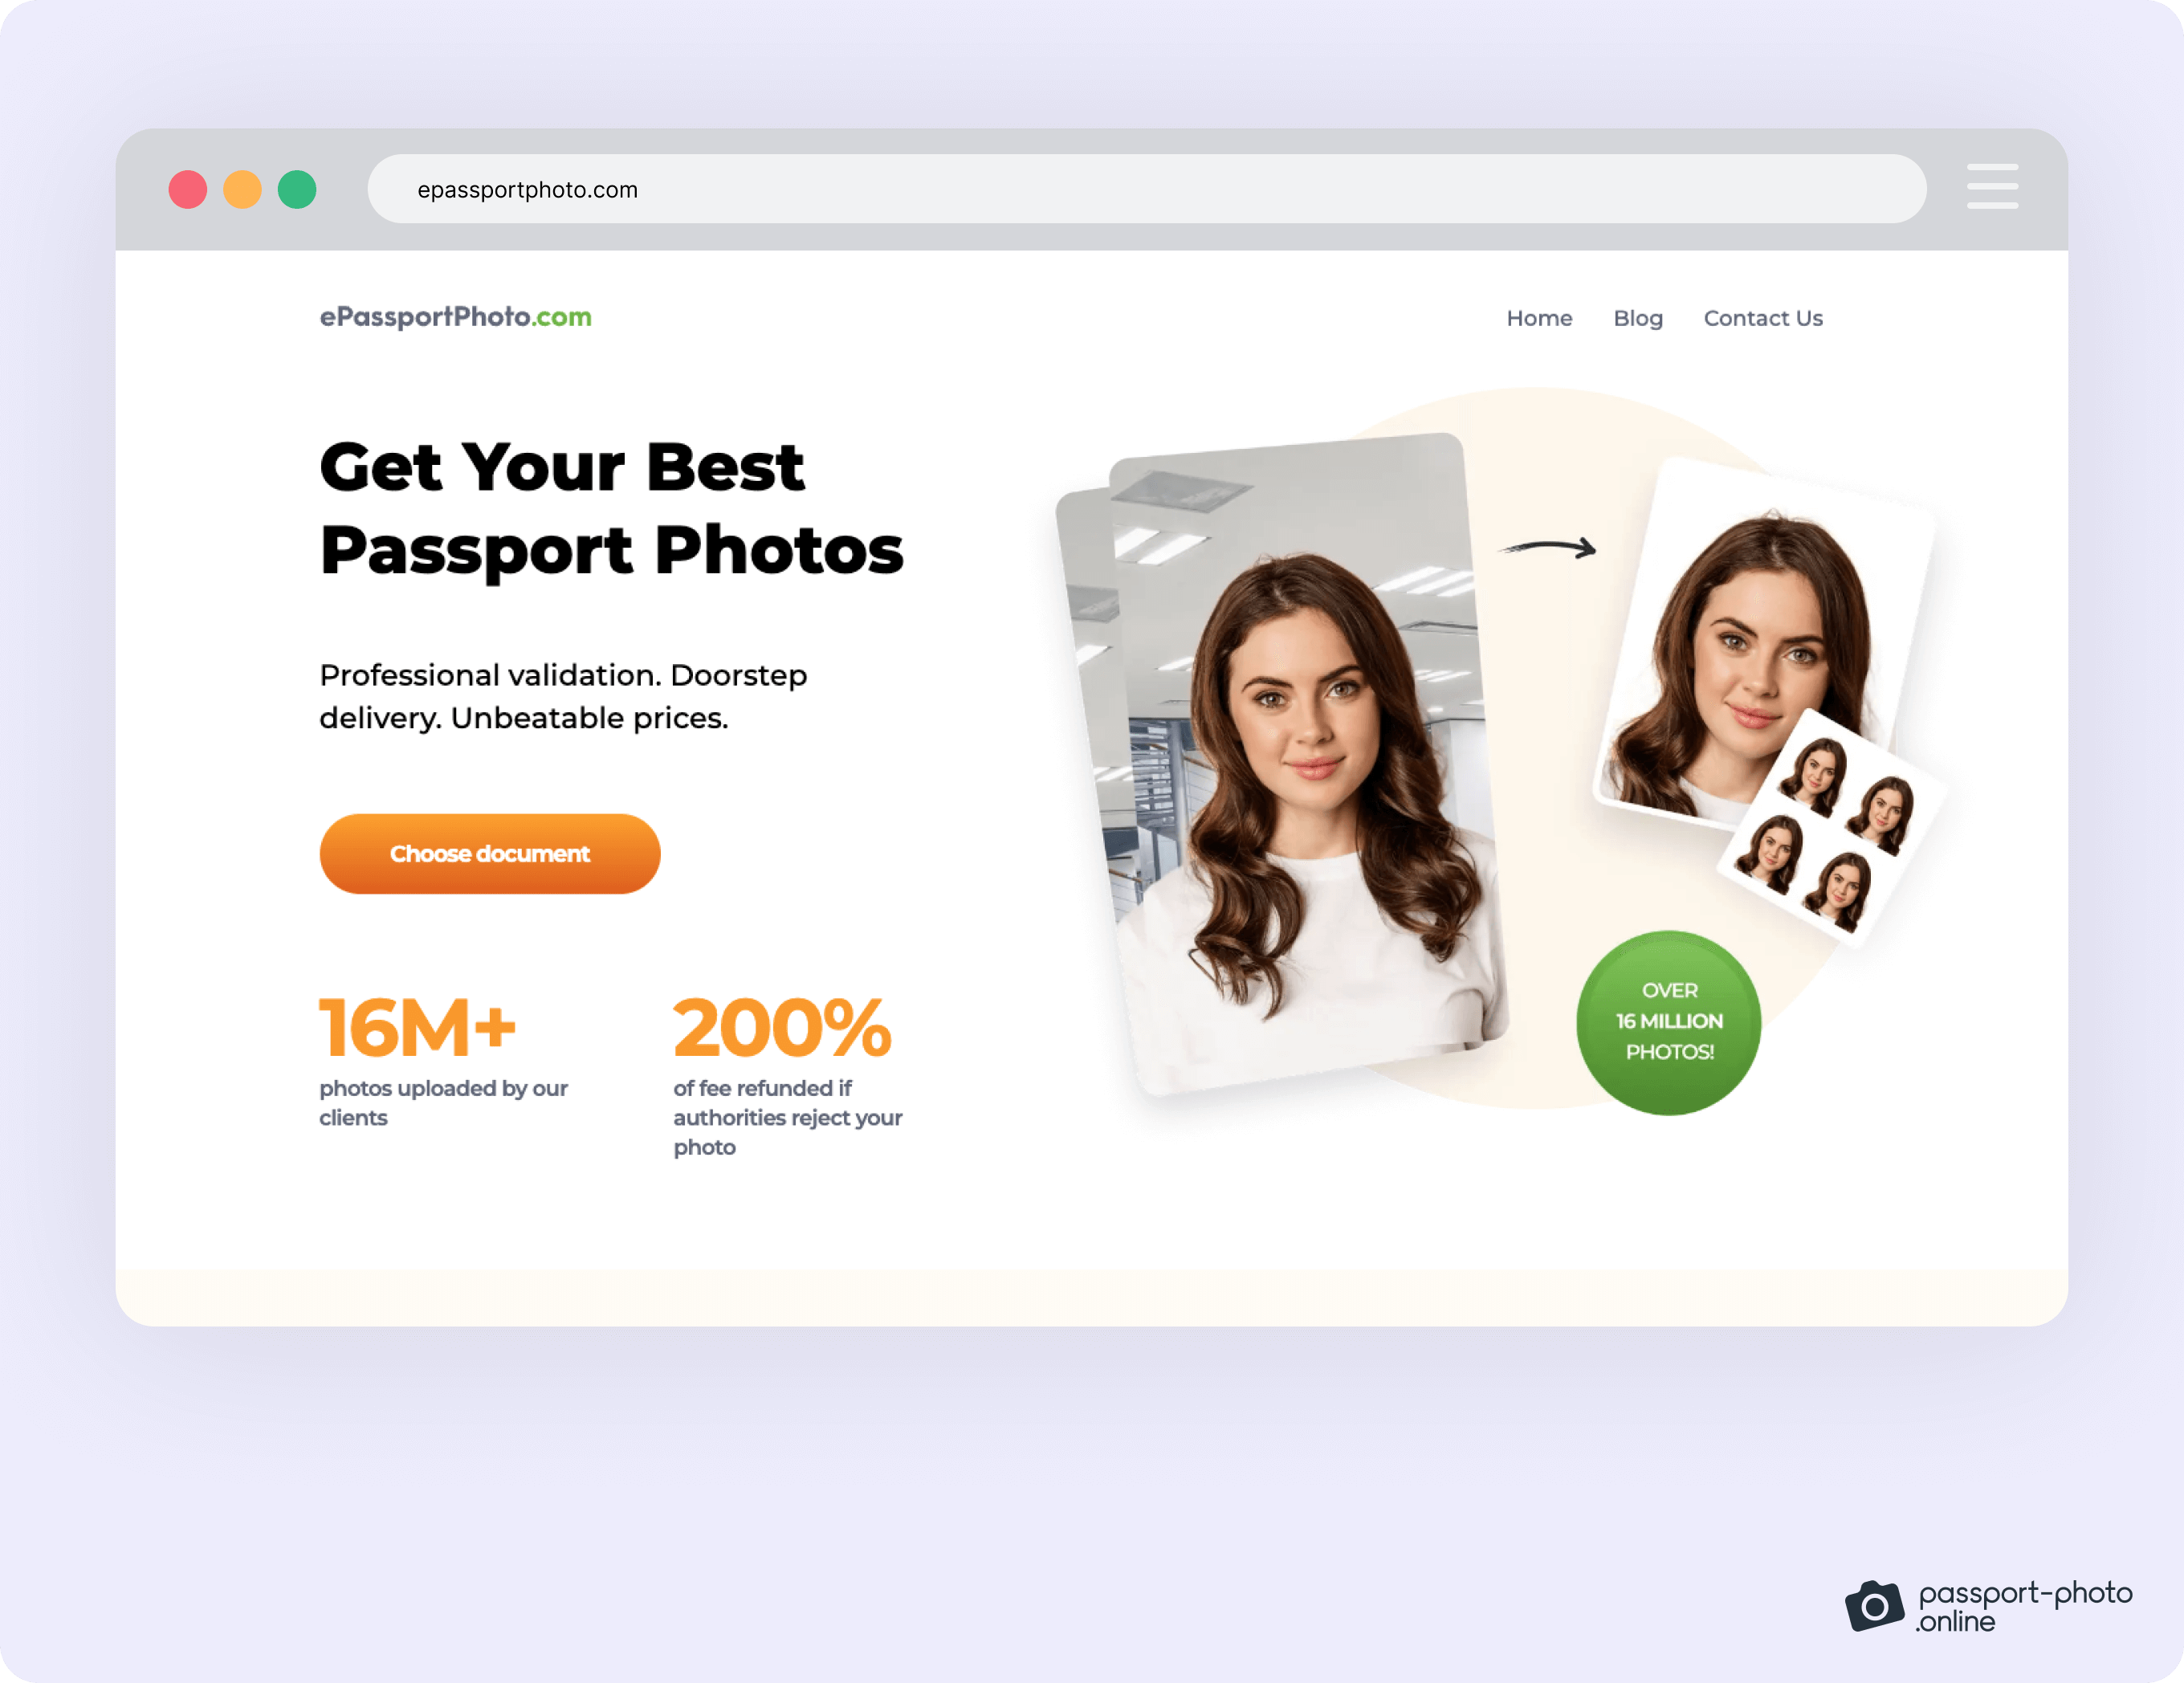 epassportphoto.com allows users to get quality passport photos with only their cell phones—quickly and conveniently.